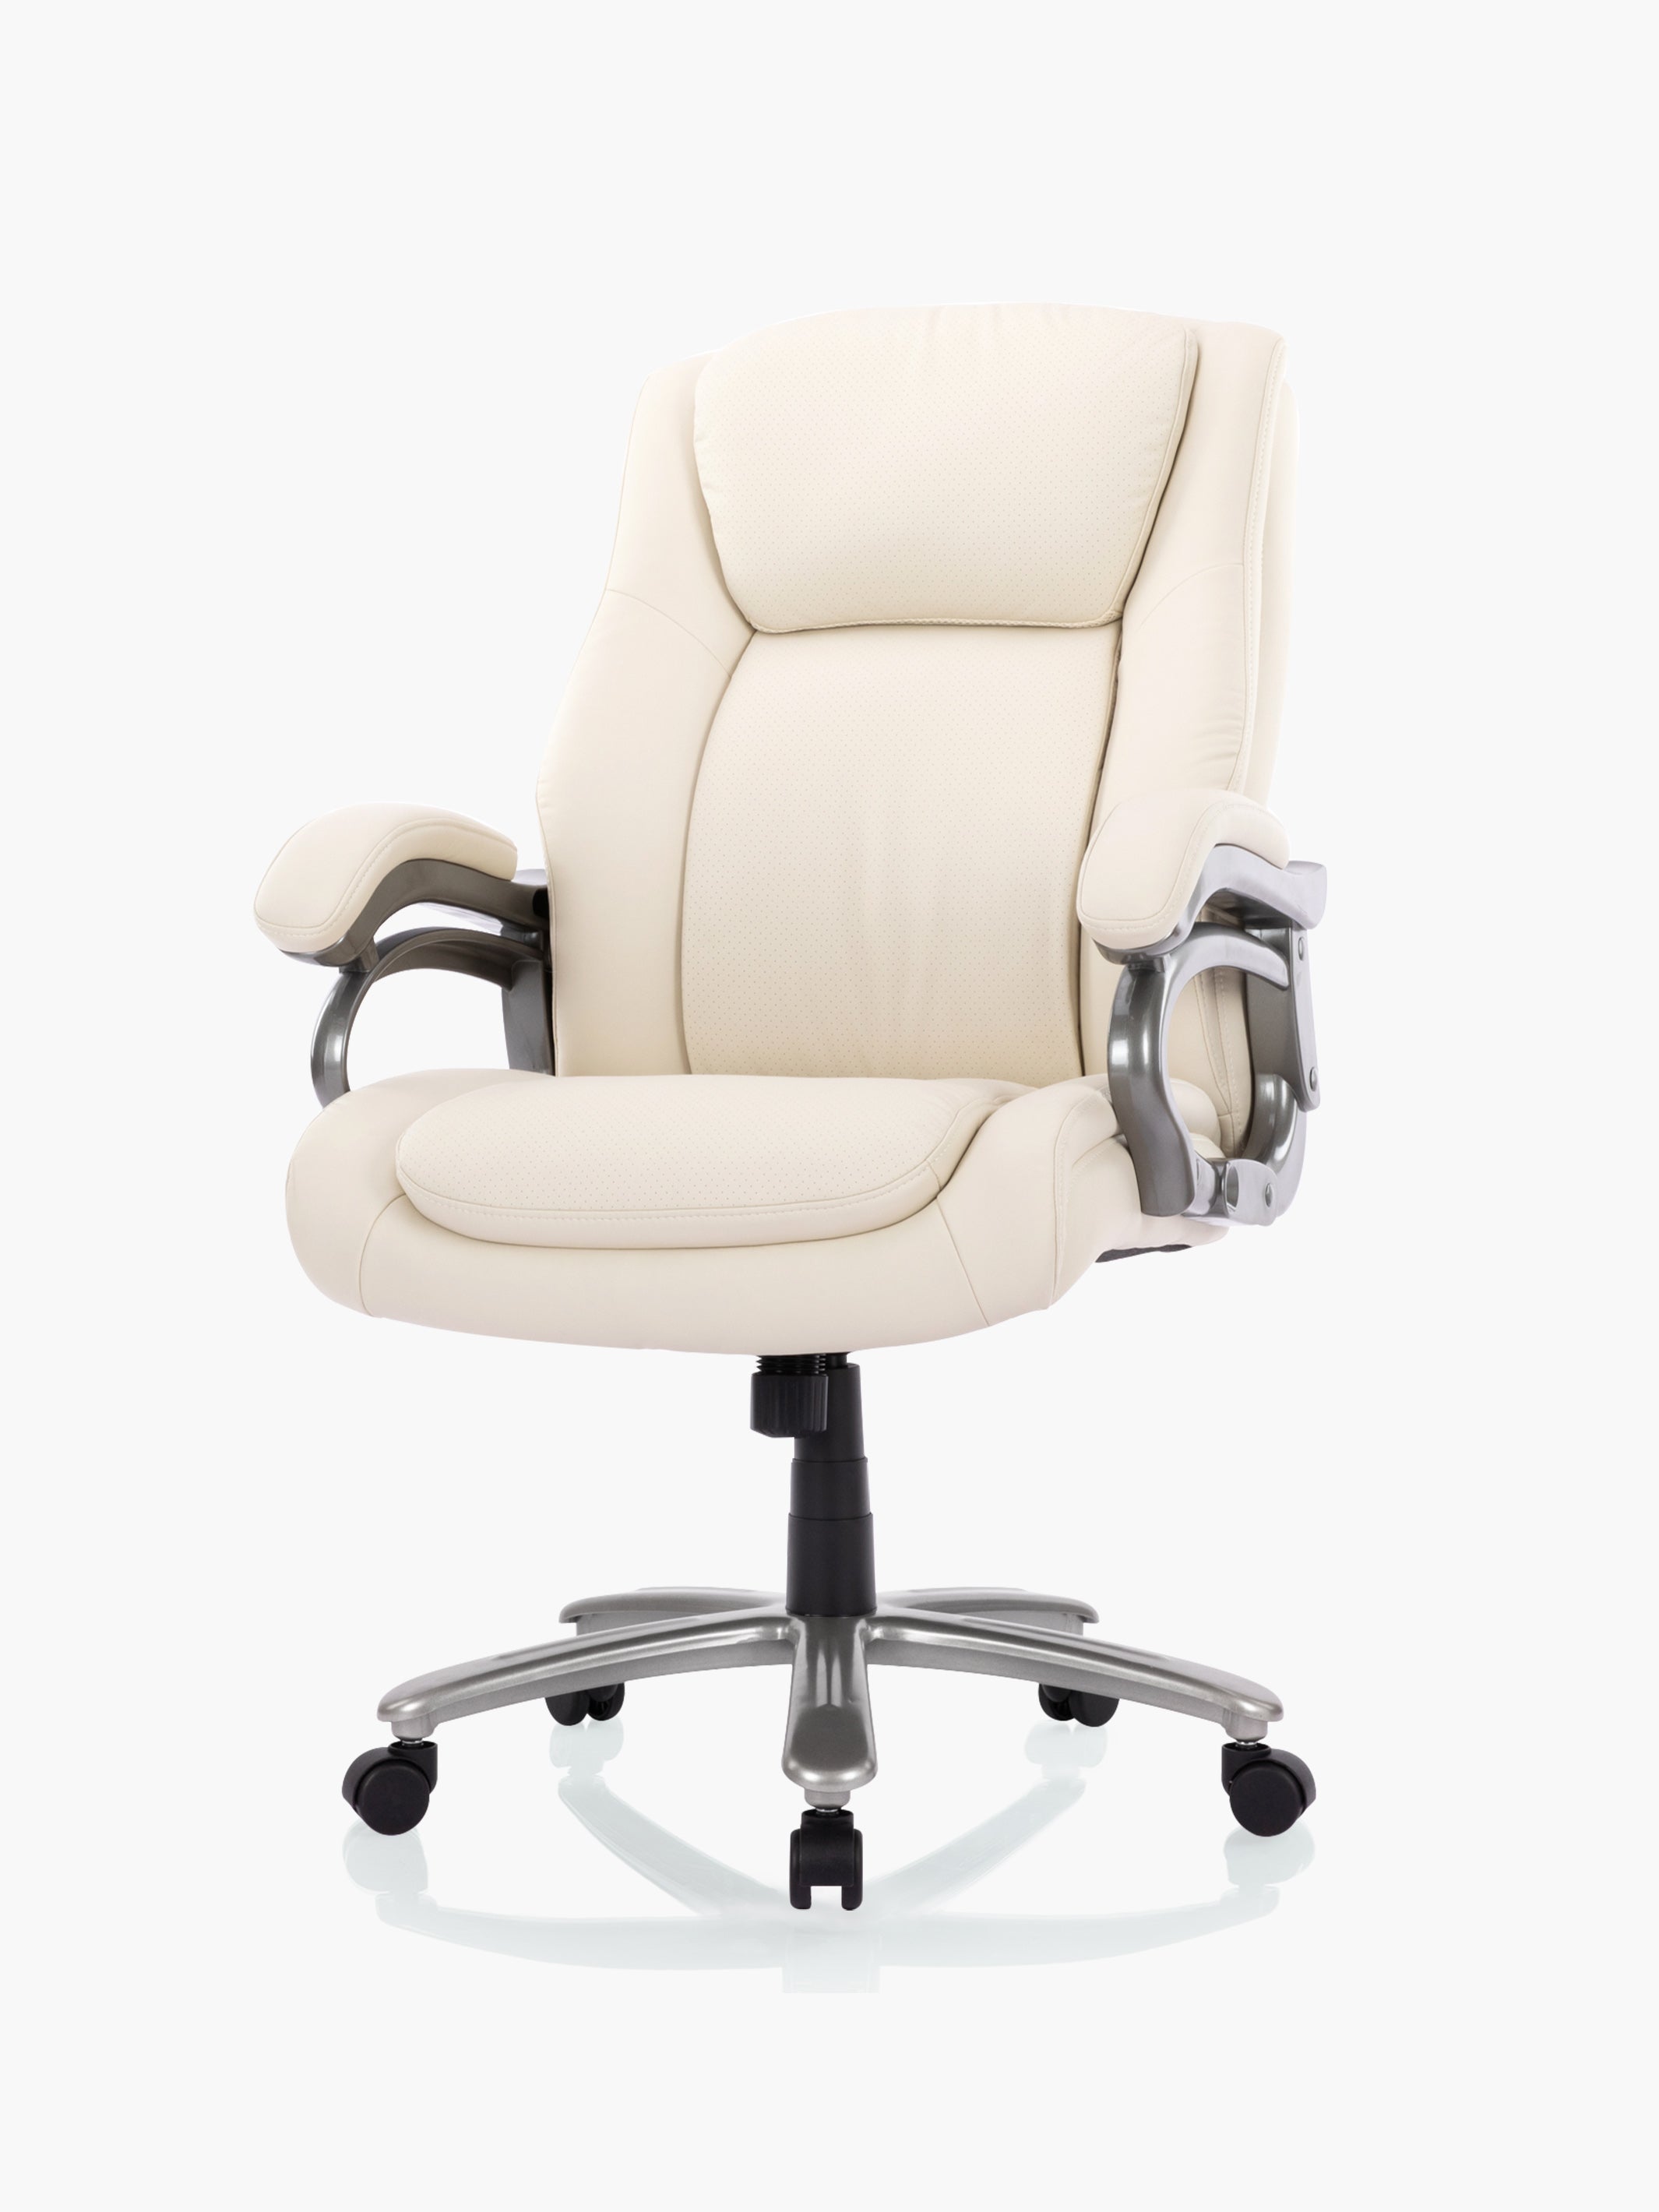 COLAMY 400lbs Big and Tall Executive PU Leather Office Chair CL5103 in Beige #color_beige